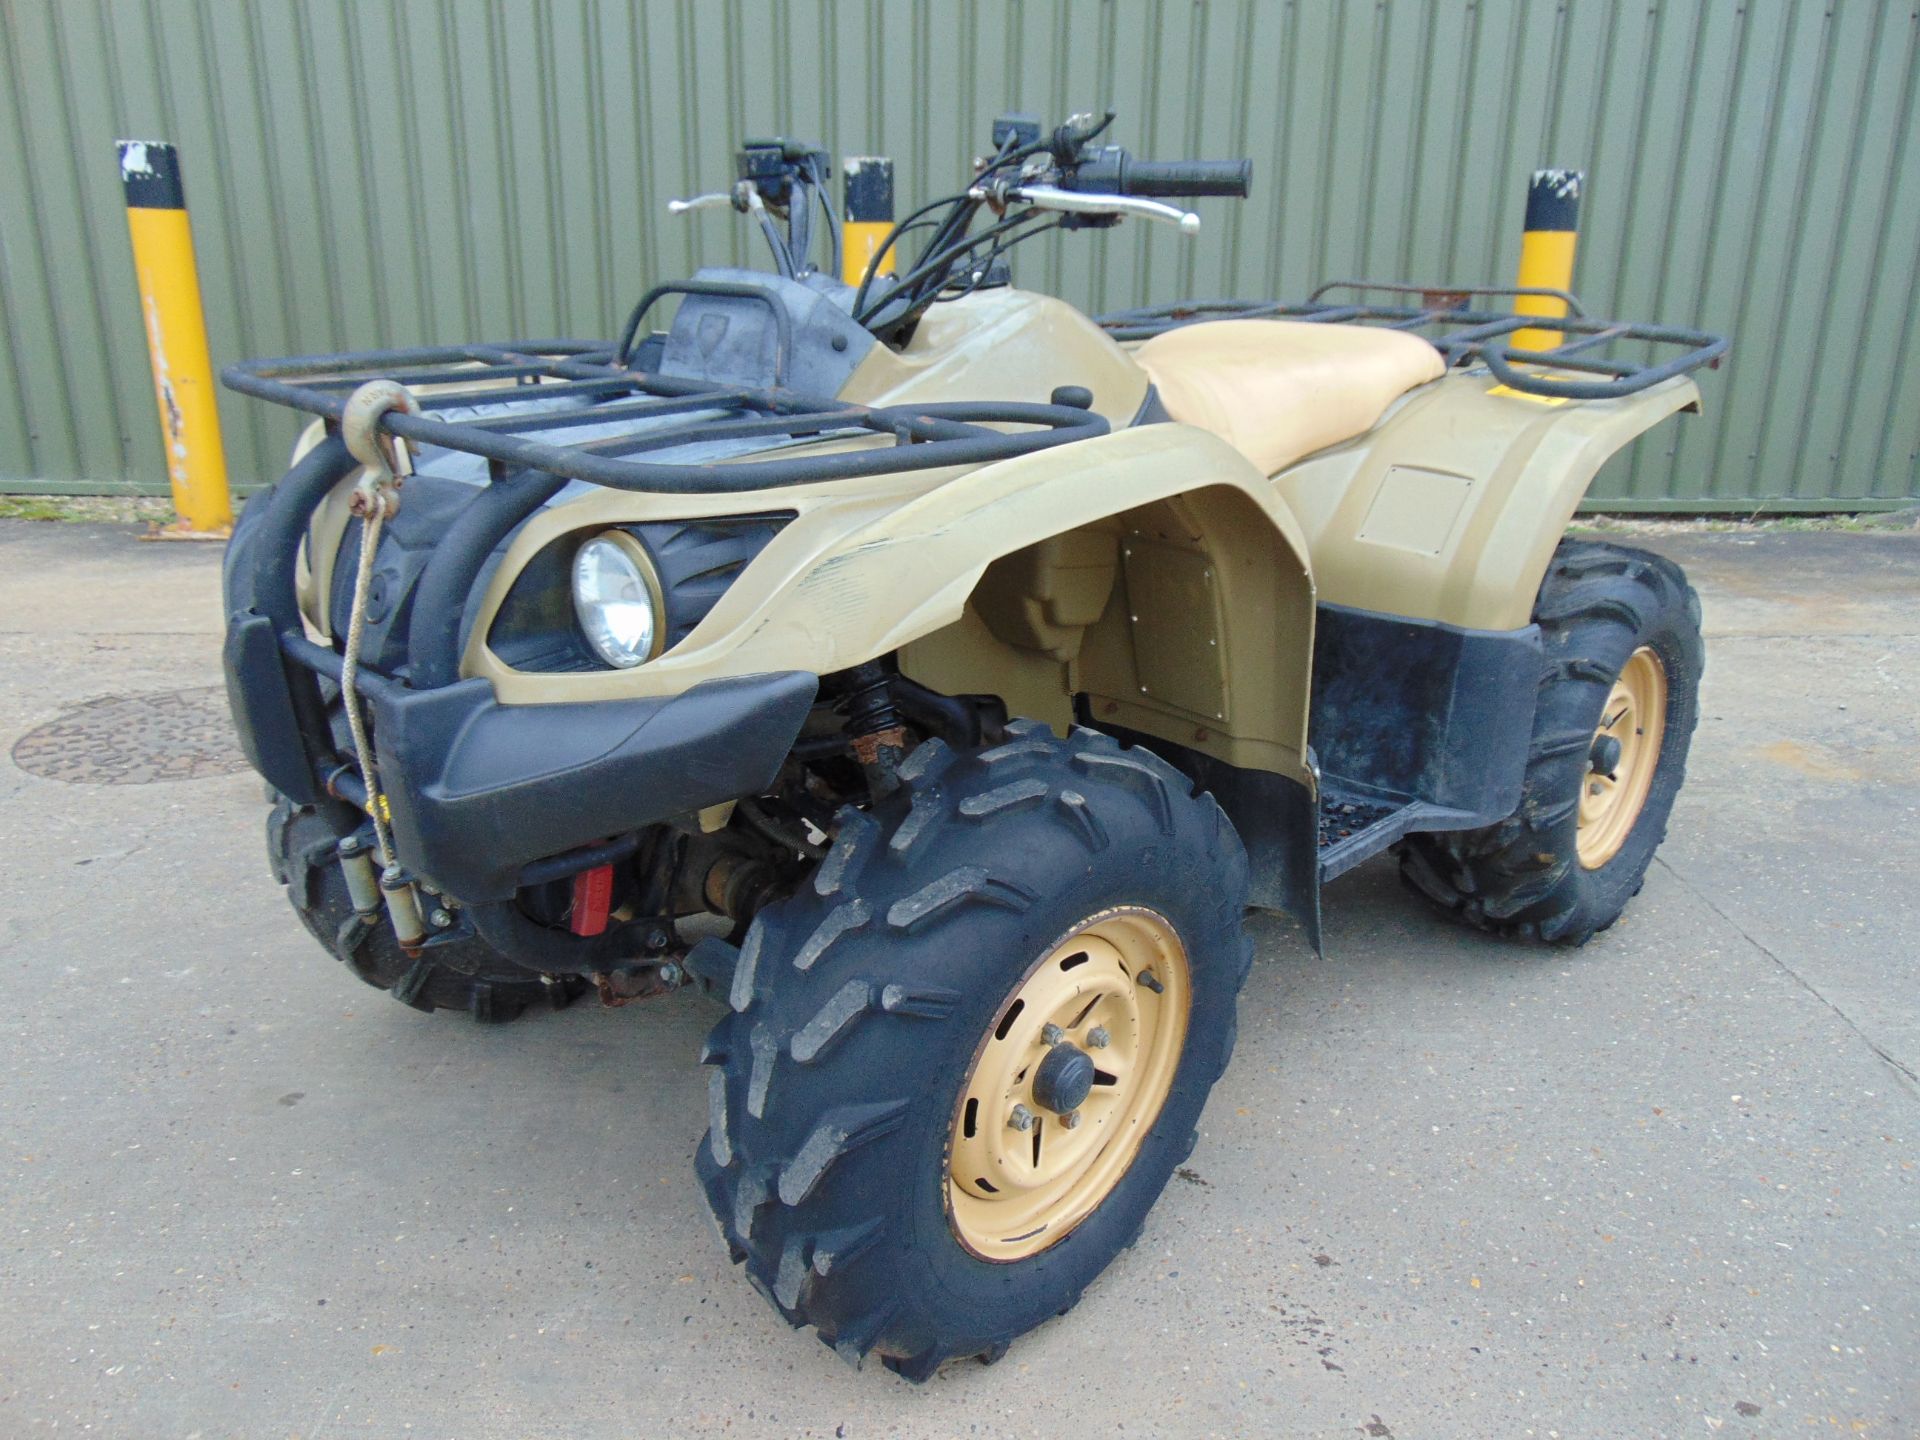 Recent Release Military Specification Yamaha Grizzly 450 4 x 4 ATV Quad Bike ONLY 59 HOURS!!!